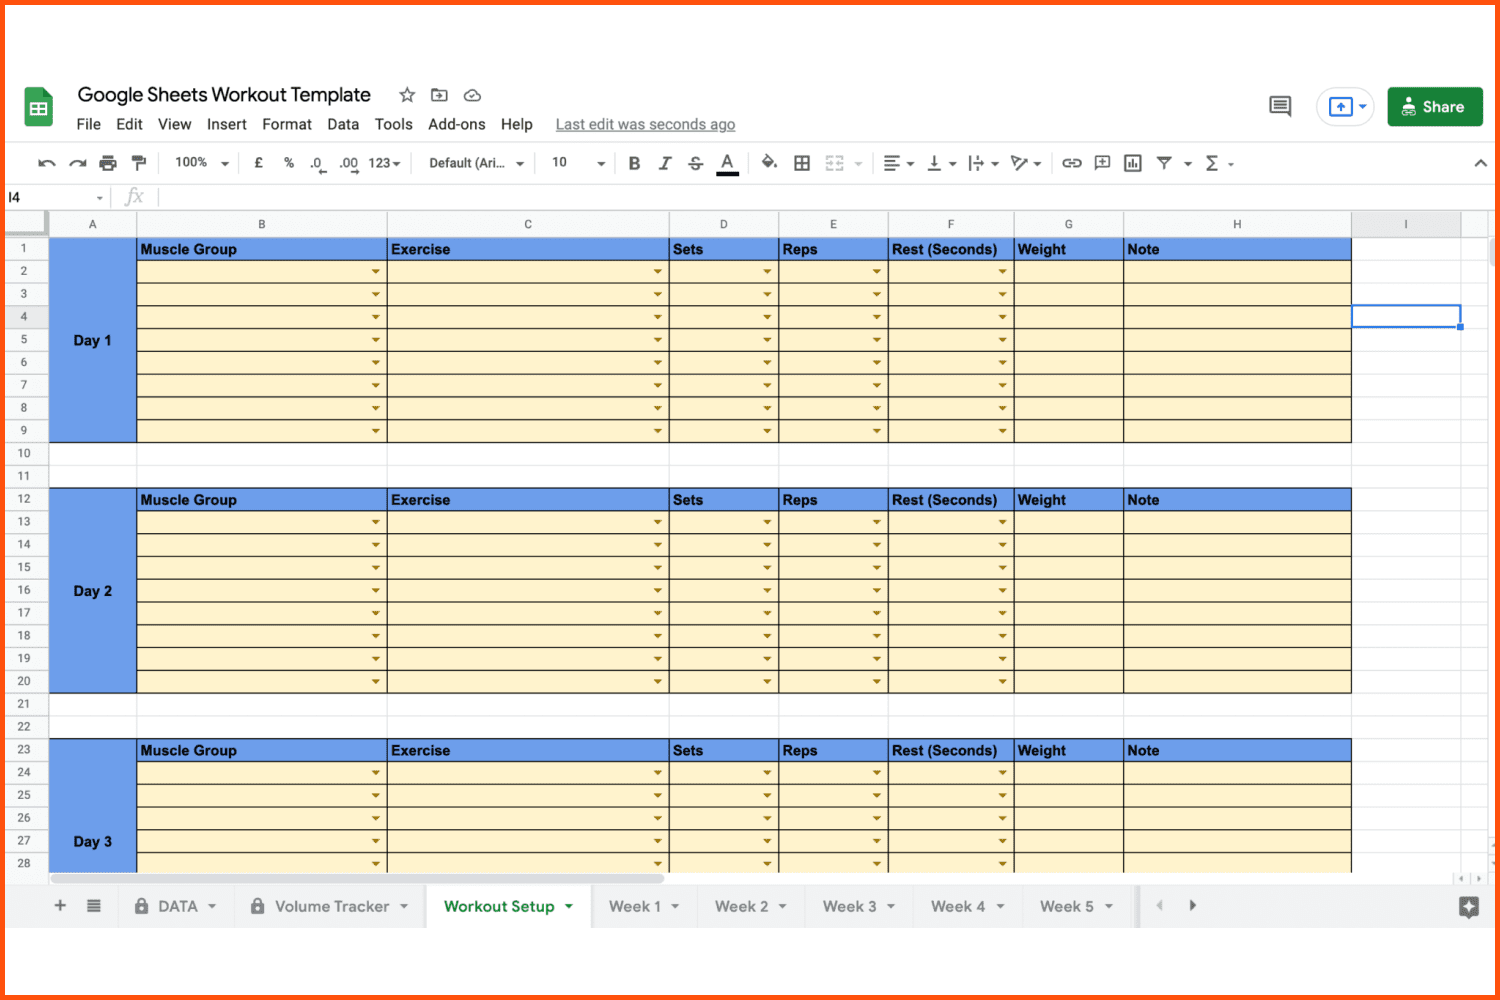 Google Sheets Workout Template by GFitness Online.